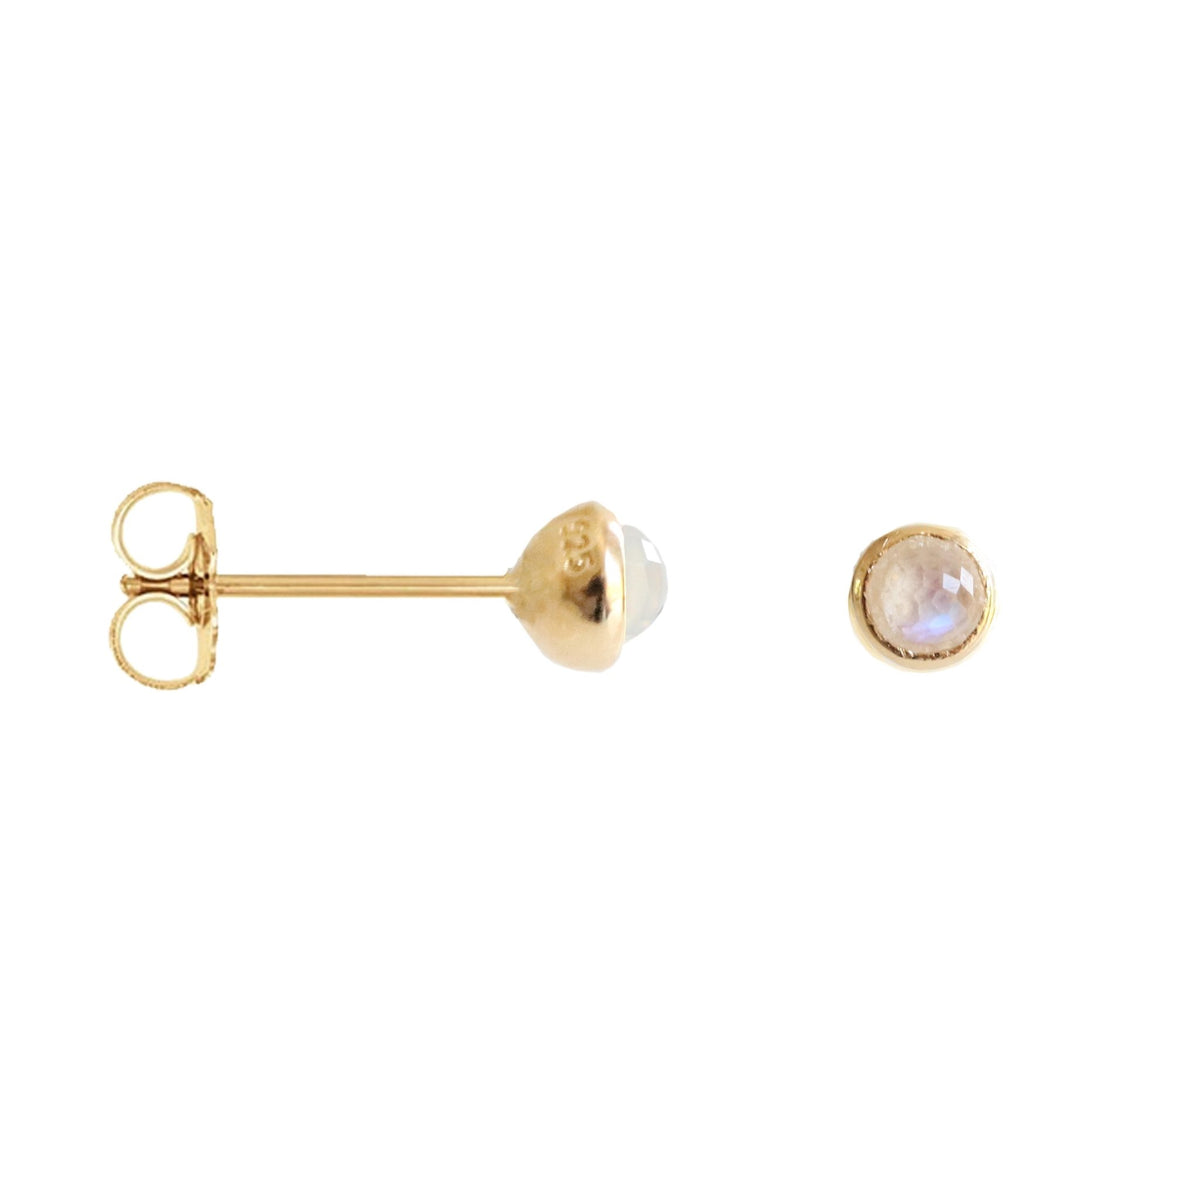 TINY PROTECT STUD EARRINGS - RAINBOW MOONSTONE &amp; GOLD - SO PRETTY CARA COTTER